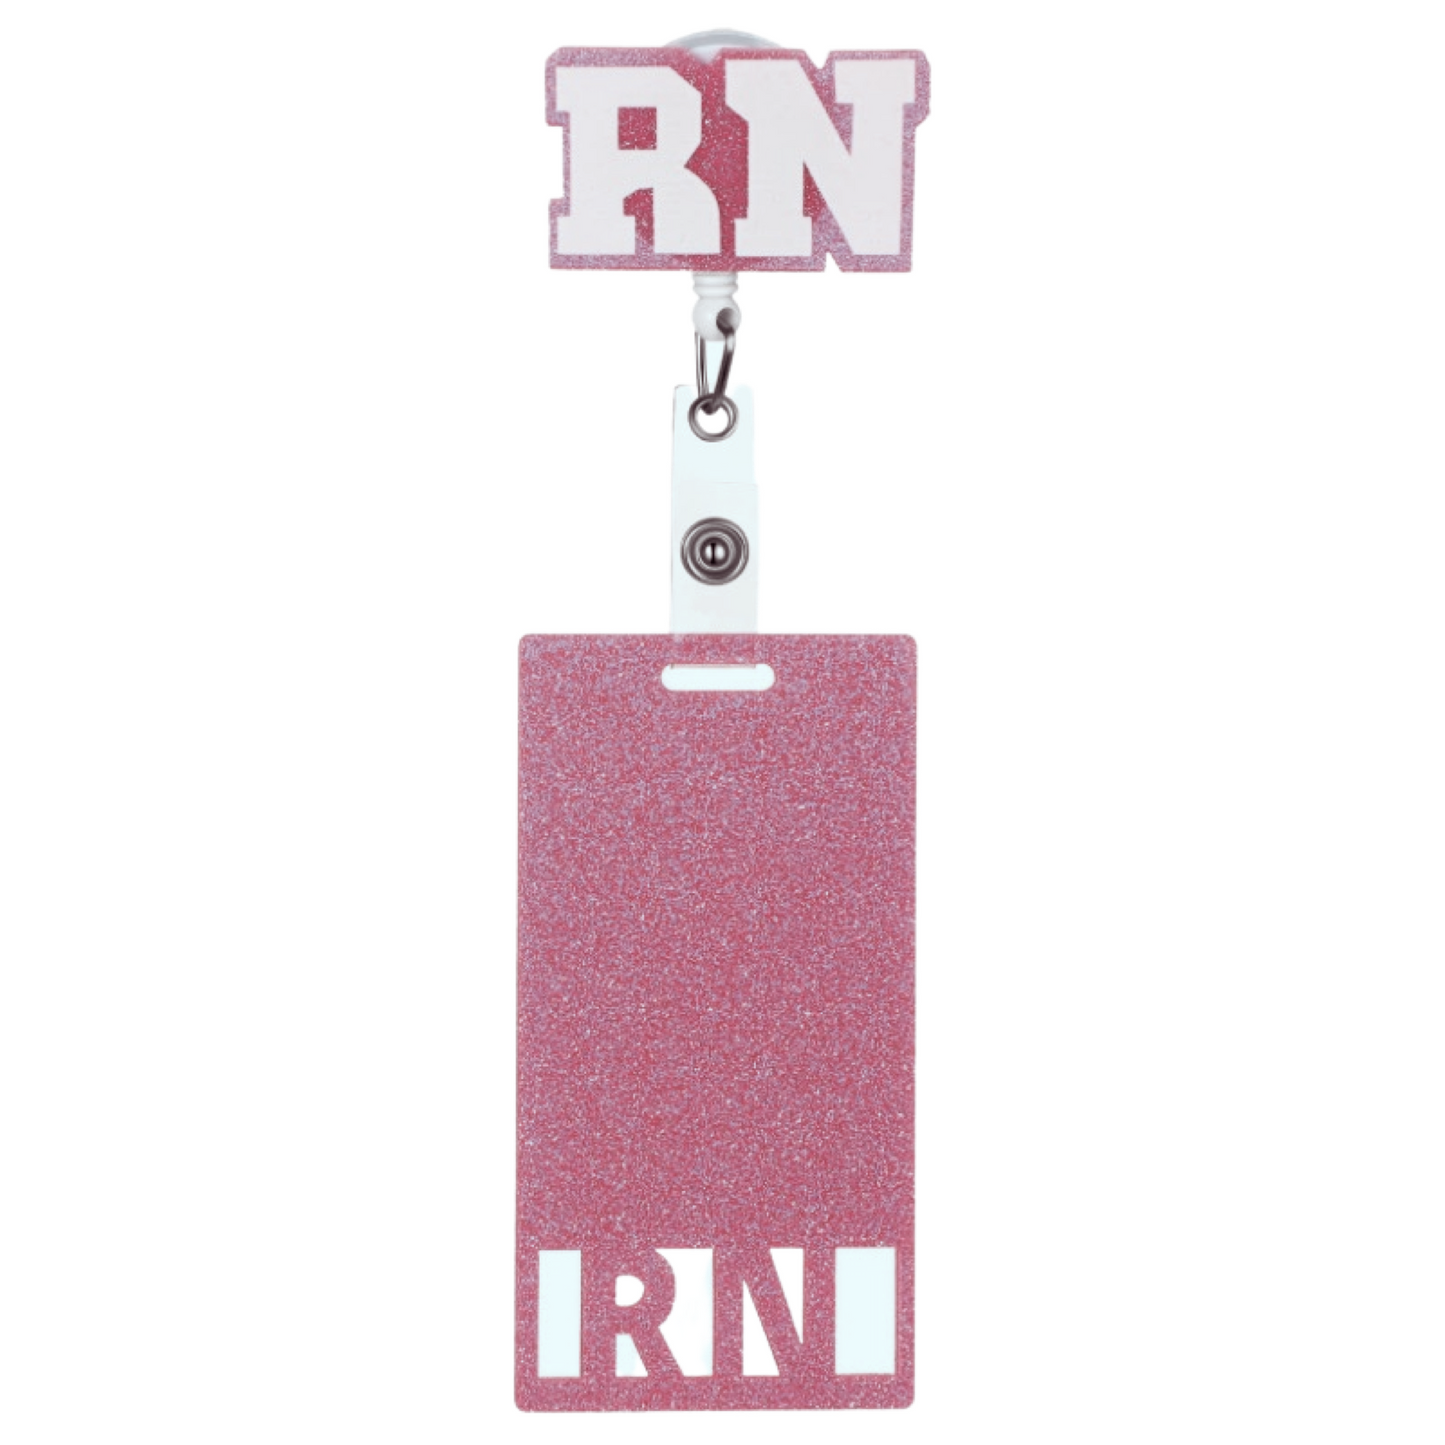 RN Badge Reel with Card